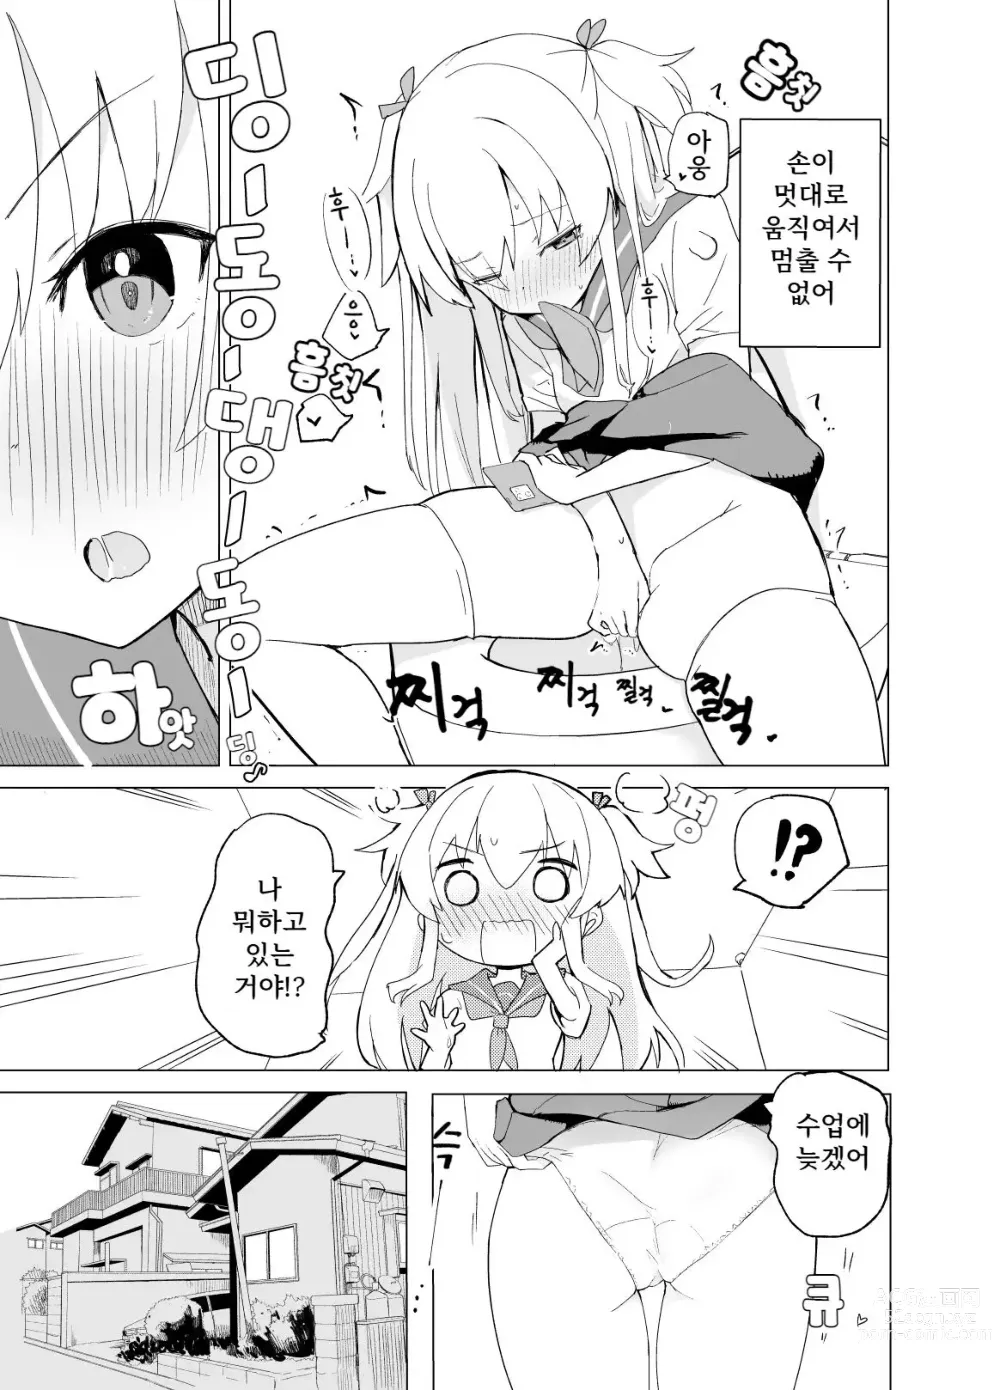 Page 10 of doujinshi S.S.S.Di part 1